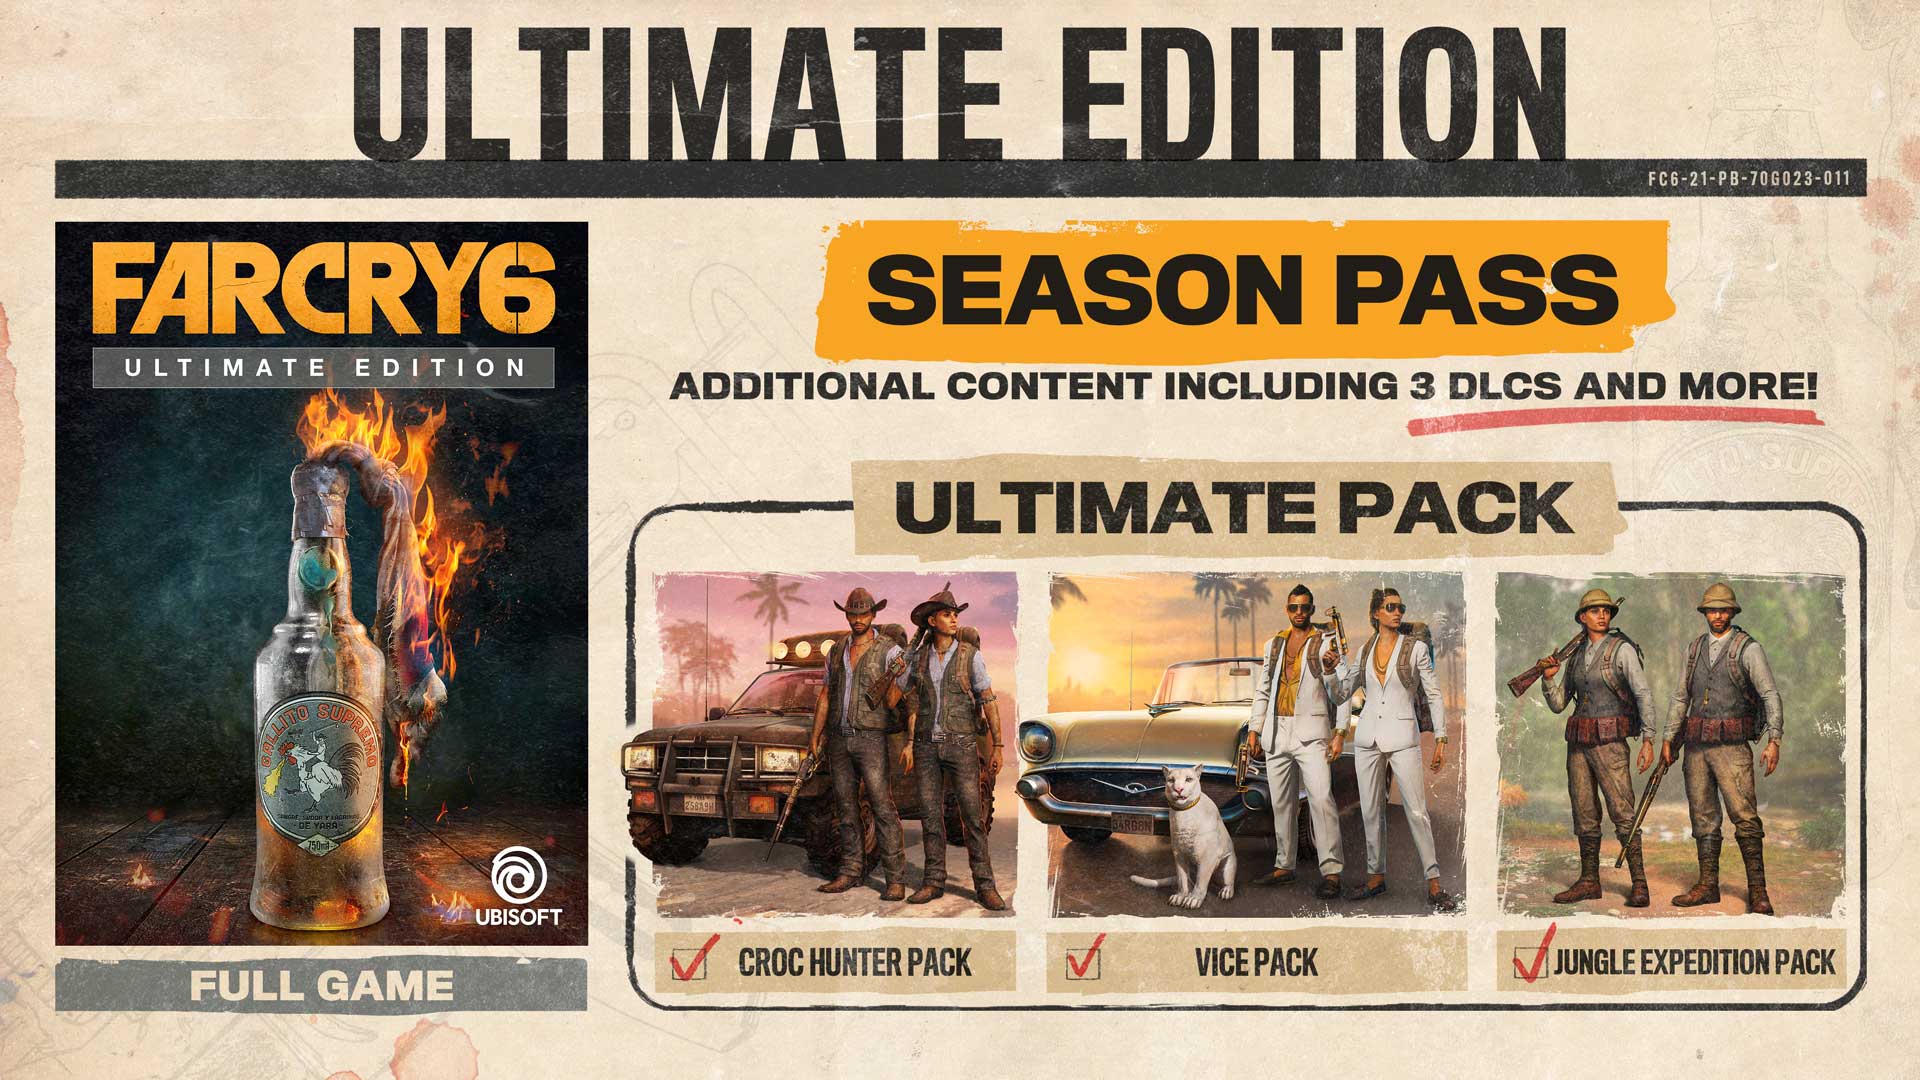 Image of Season Pass and DLCs from Far Cry 6